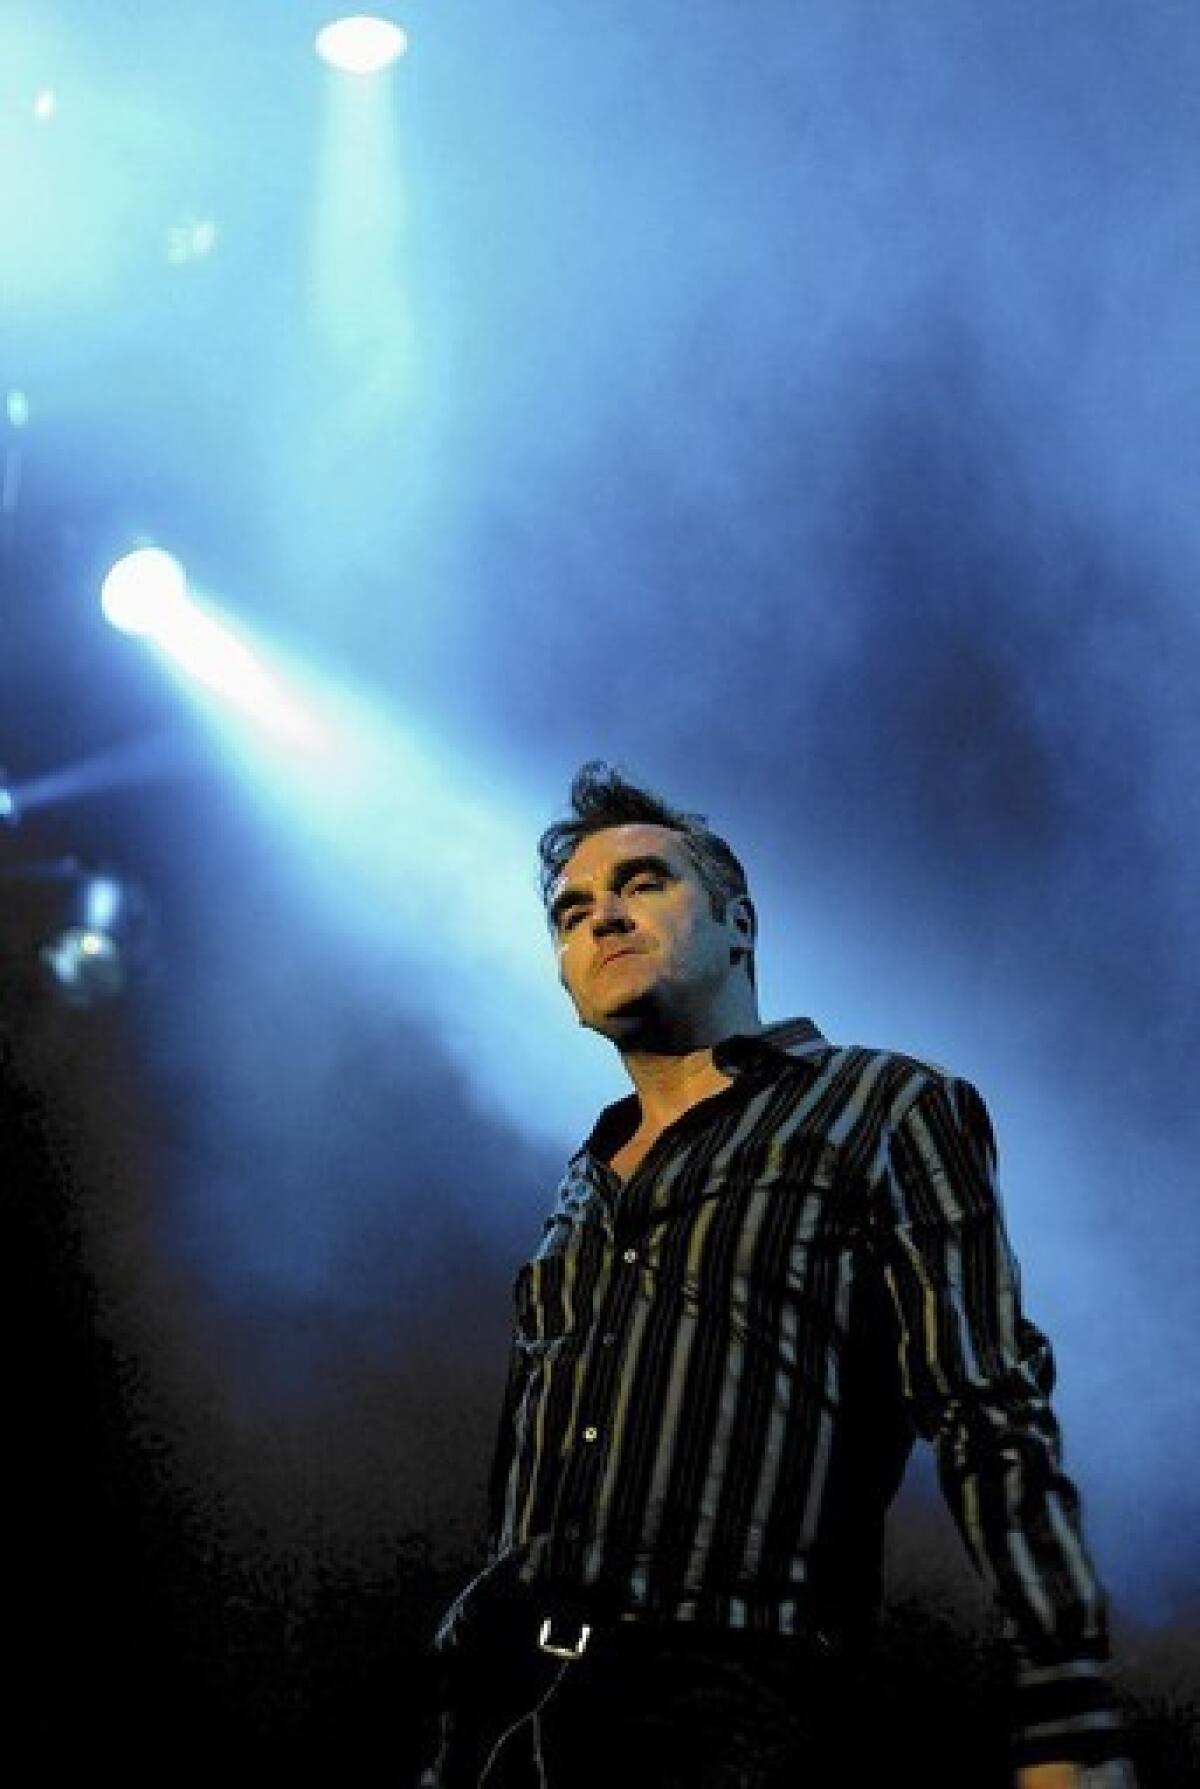 Morrissey, the former frontman of the Smiths.